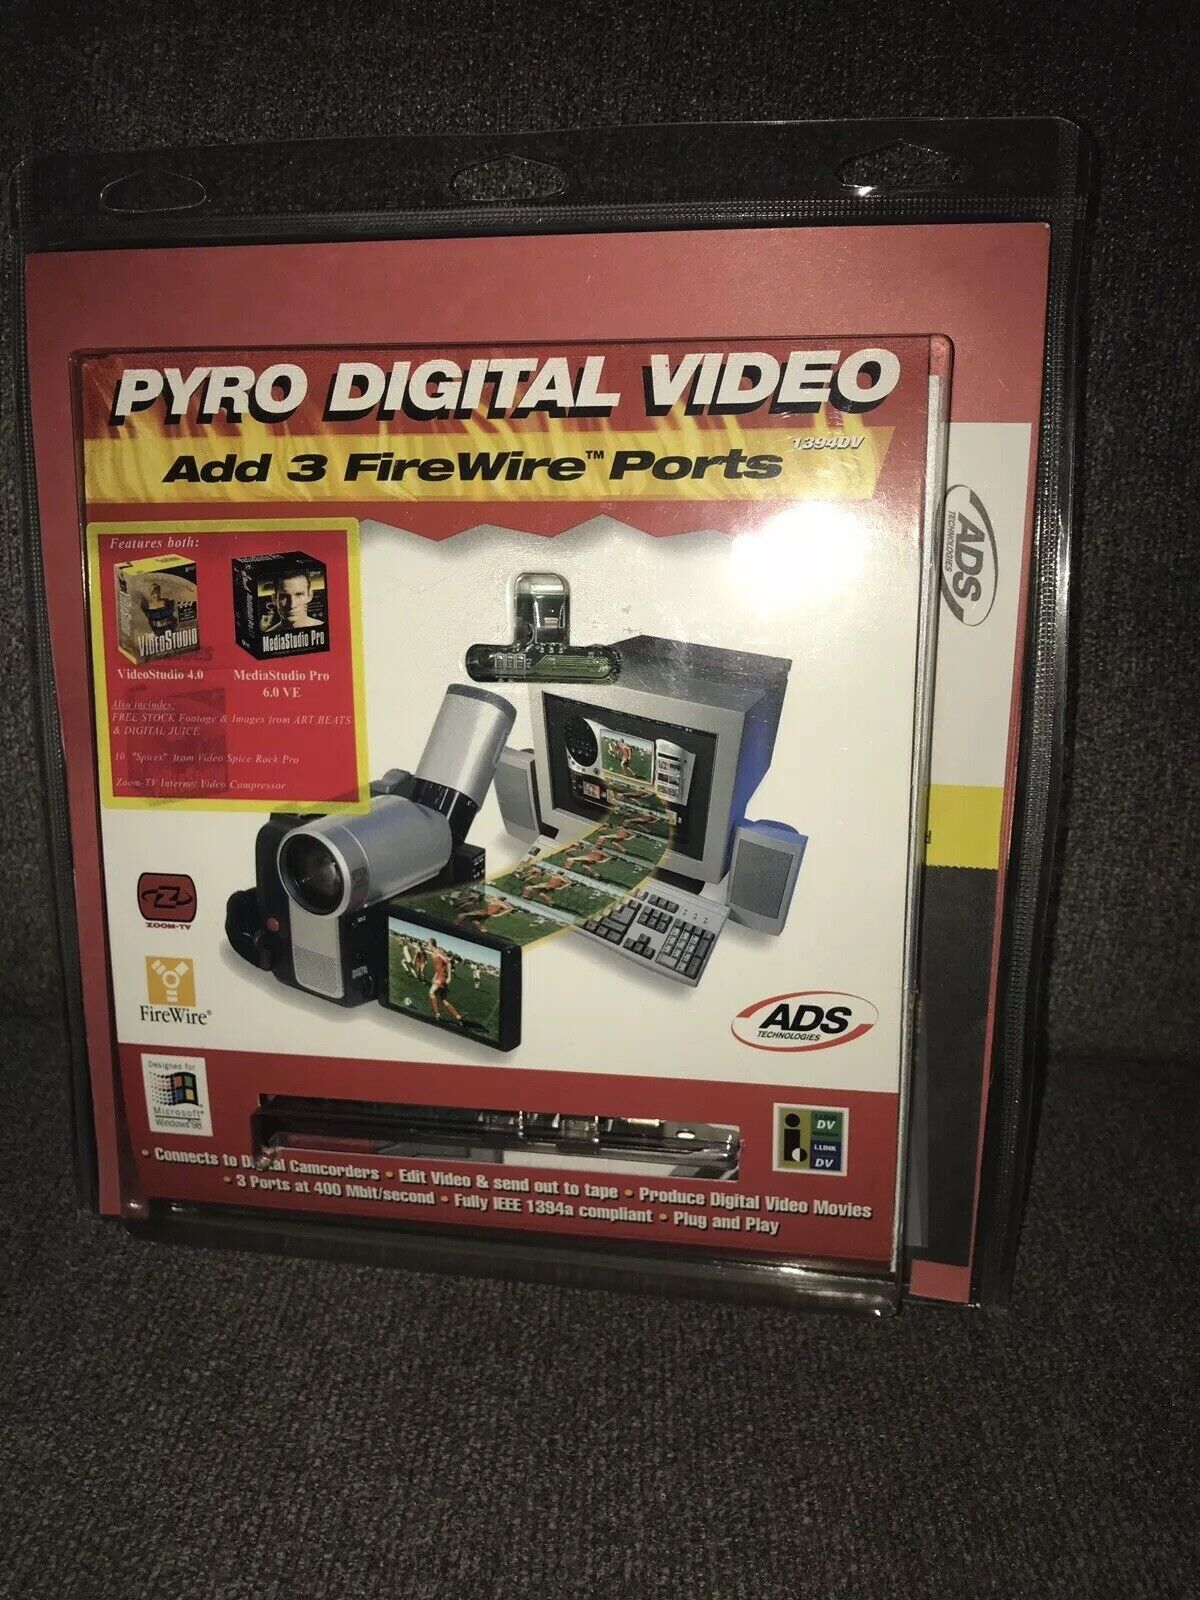 Pyro Digital Video Transfer 1394DV Create Exciting Videos in Just Minutes New